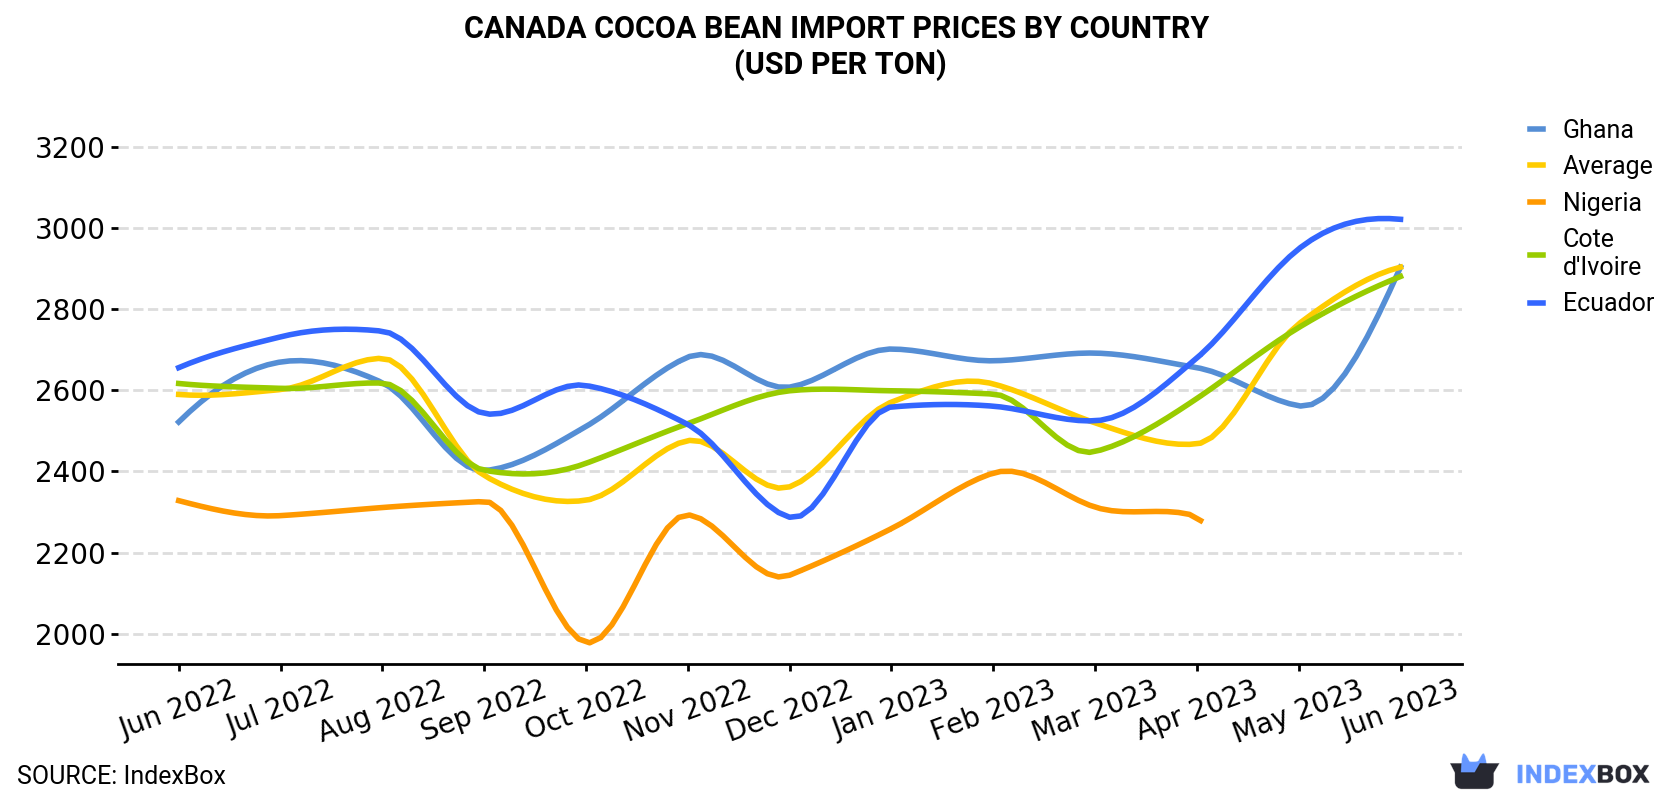 Canada Cocoa Bean Import Prices By Country (USD Per Ton)